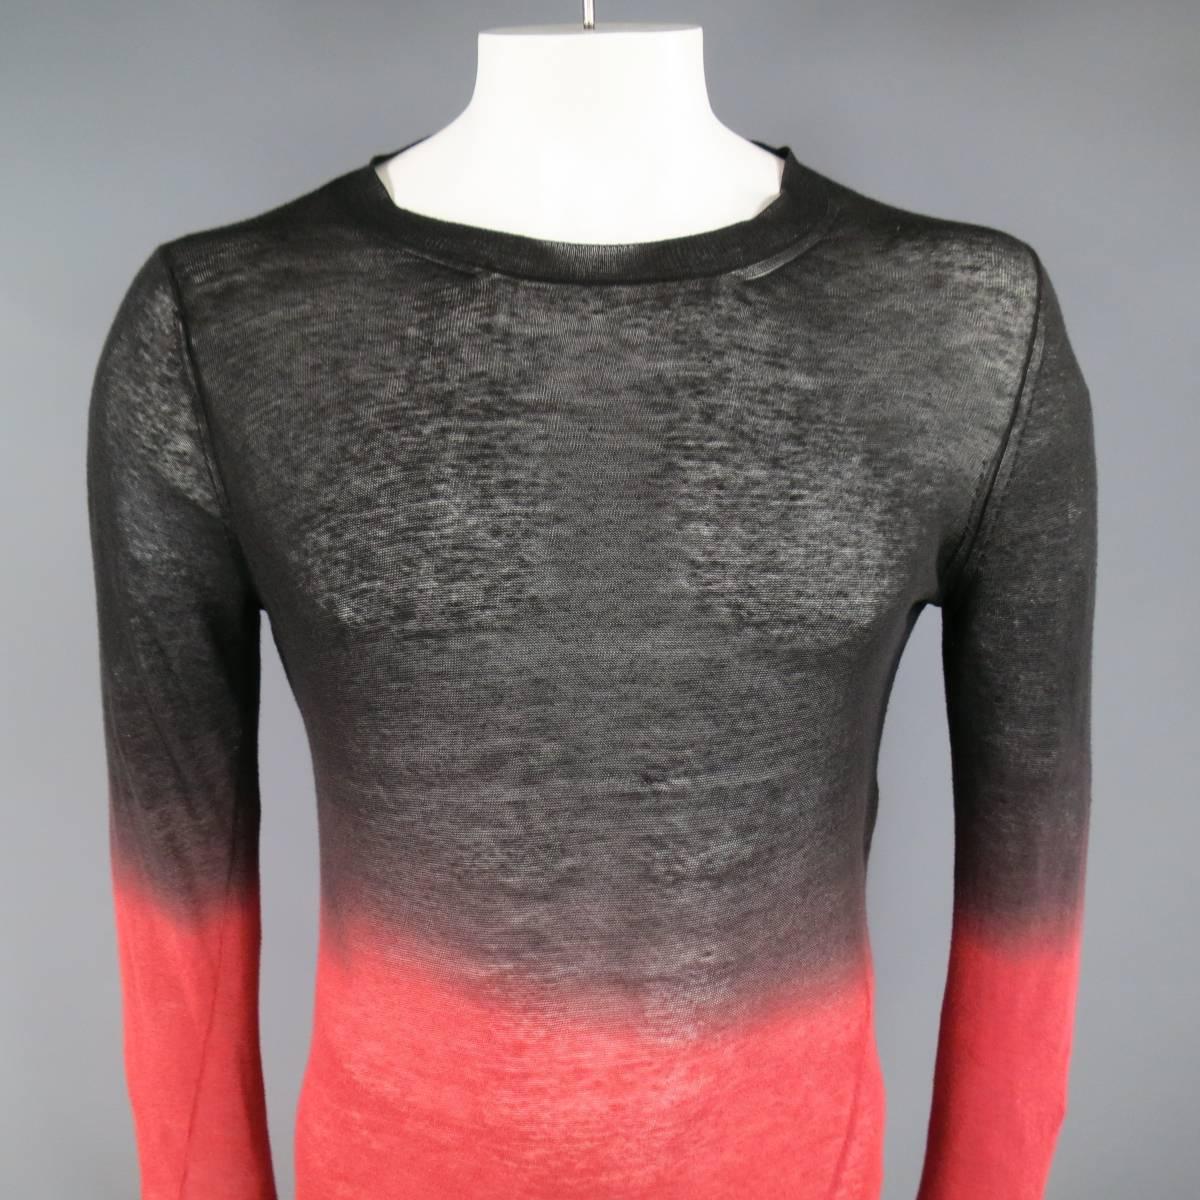 ANN DEMEULEMEESTER Pullover consists of cotton/ cashmere material in a two-toned color. Designed with a crew-neck collar, rib texture, elongated silhouette with see-through material. Bottom hem ombre's into a red color and mid sleeves.
Made in